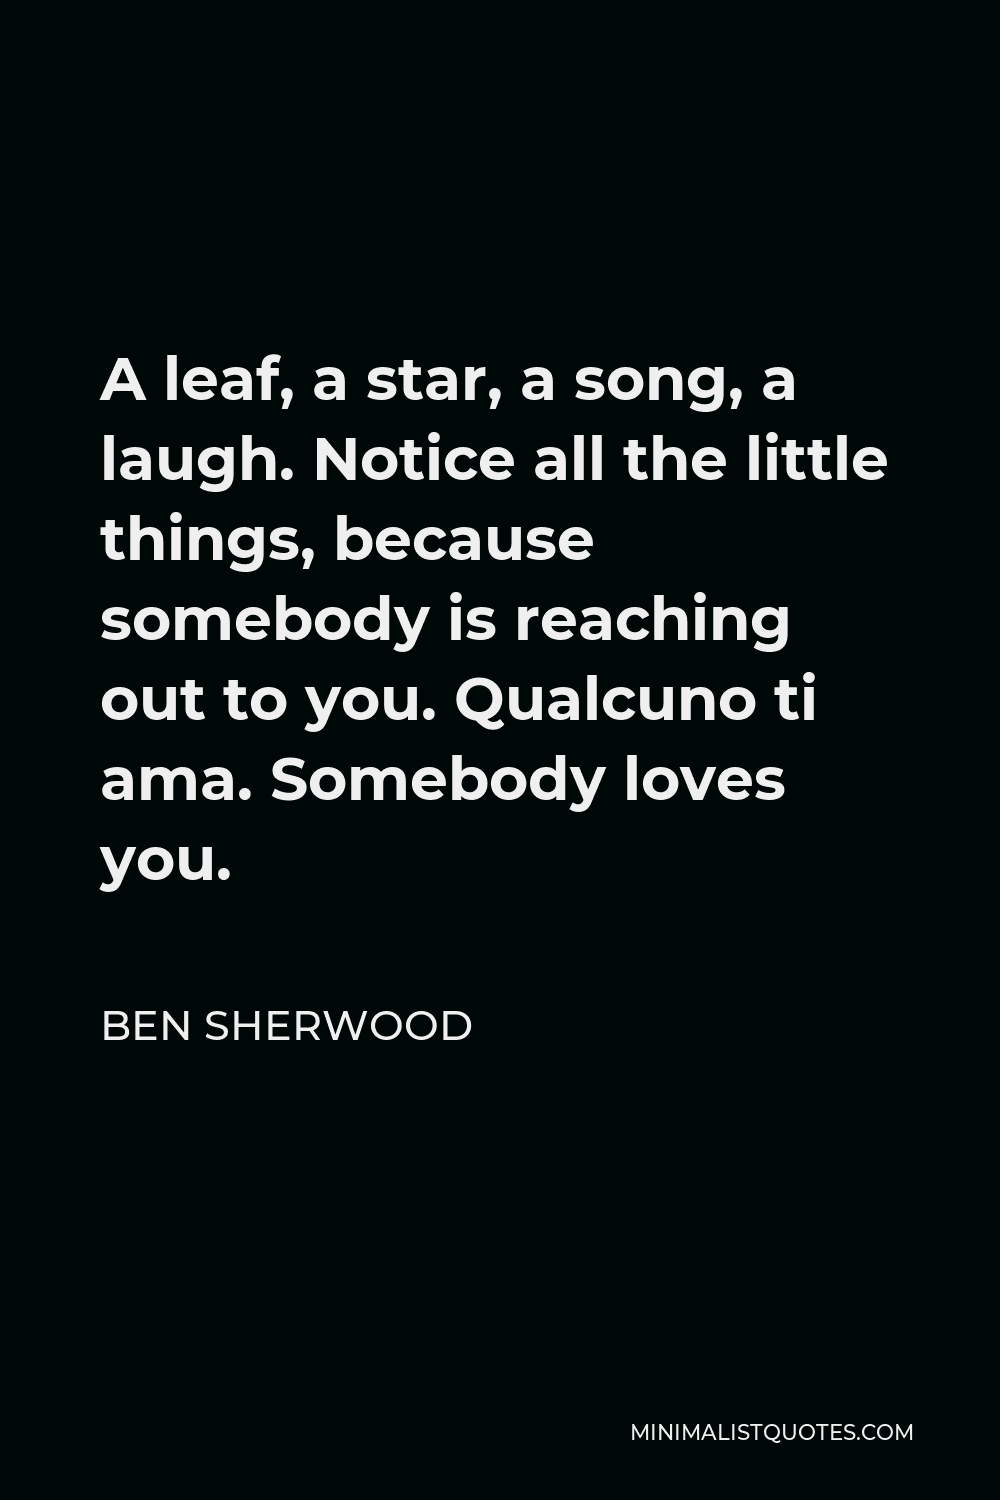 Ben Sherwood Quote - A leaf, a star, a song, a laugh. Notice all the little things, because somebody is reaching out to you. Qualcuno ti ama. Somebody loves you.